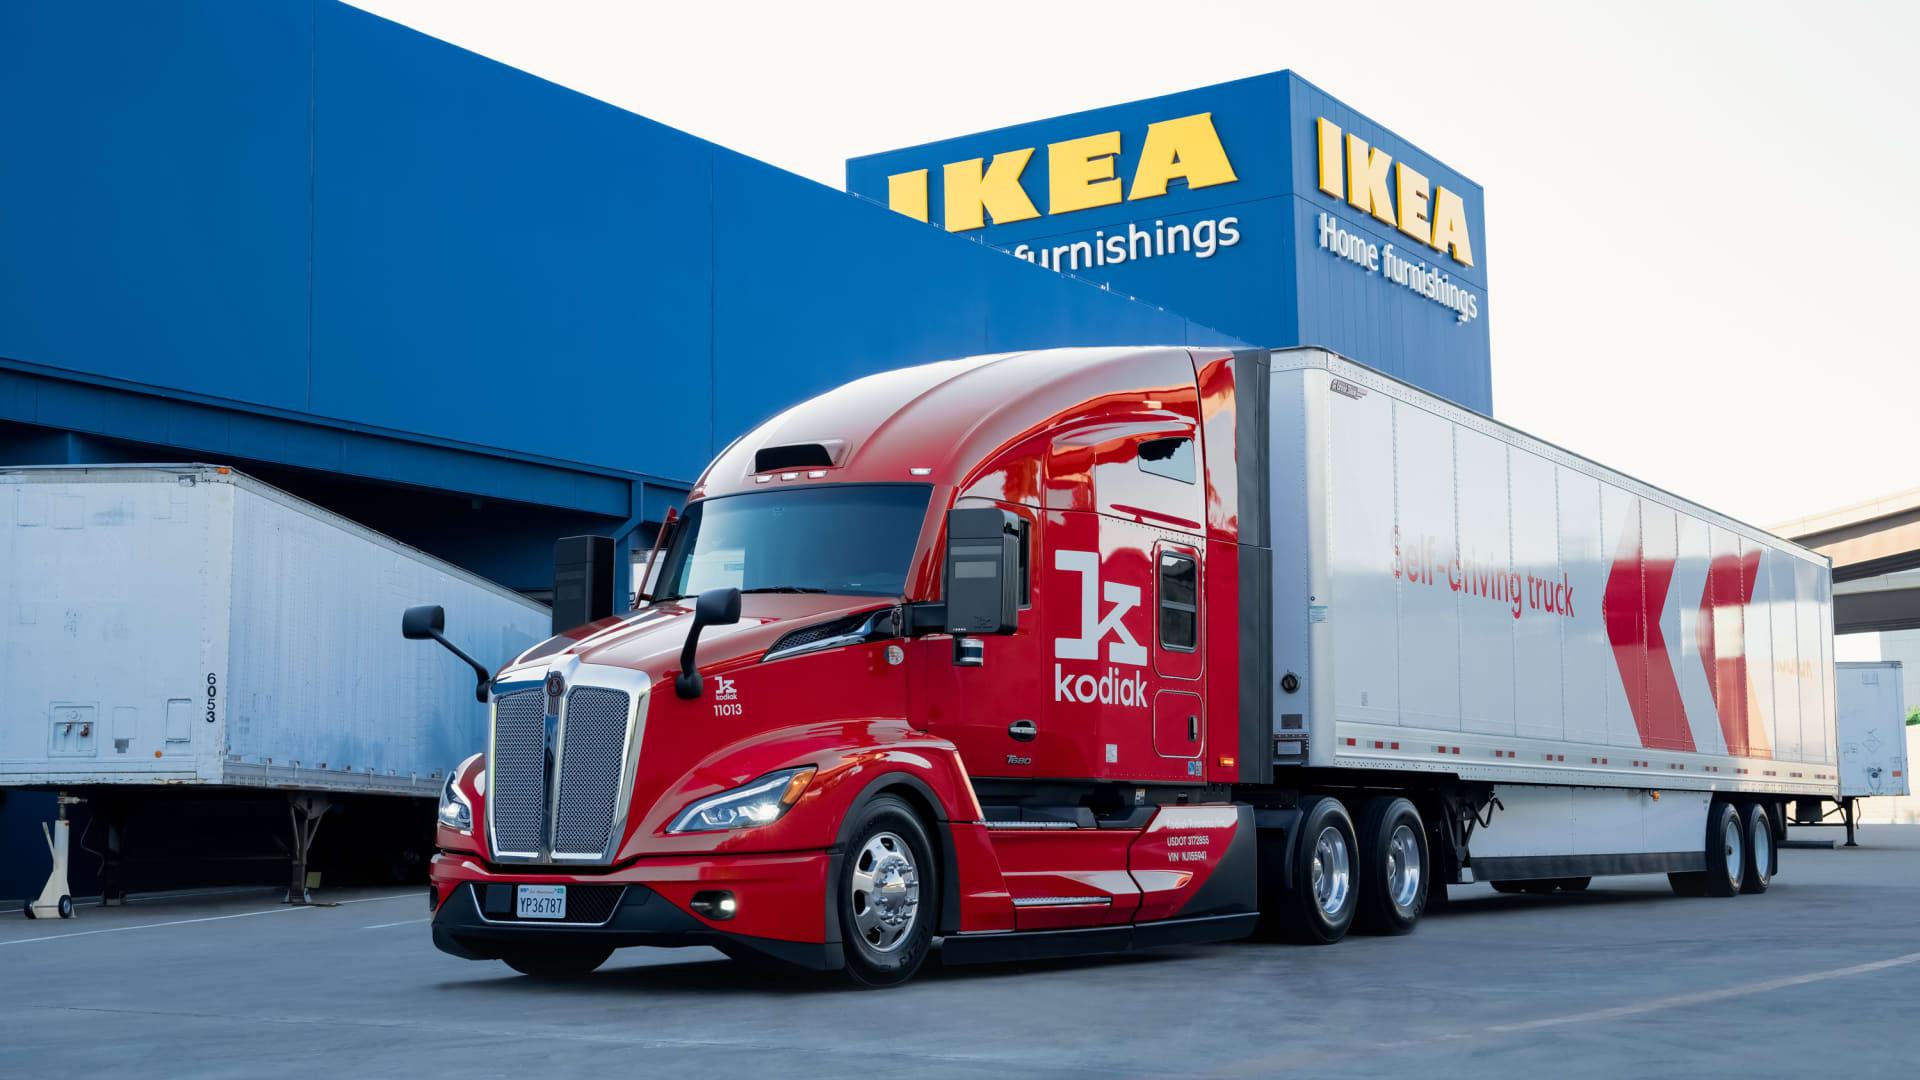 IKEA teams with self-driving truck startup Kodiak Robotics to test deliveries in Texas